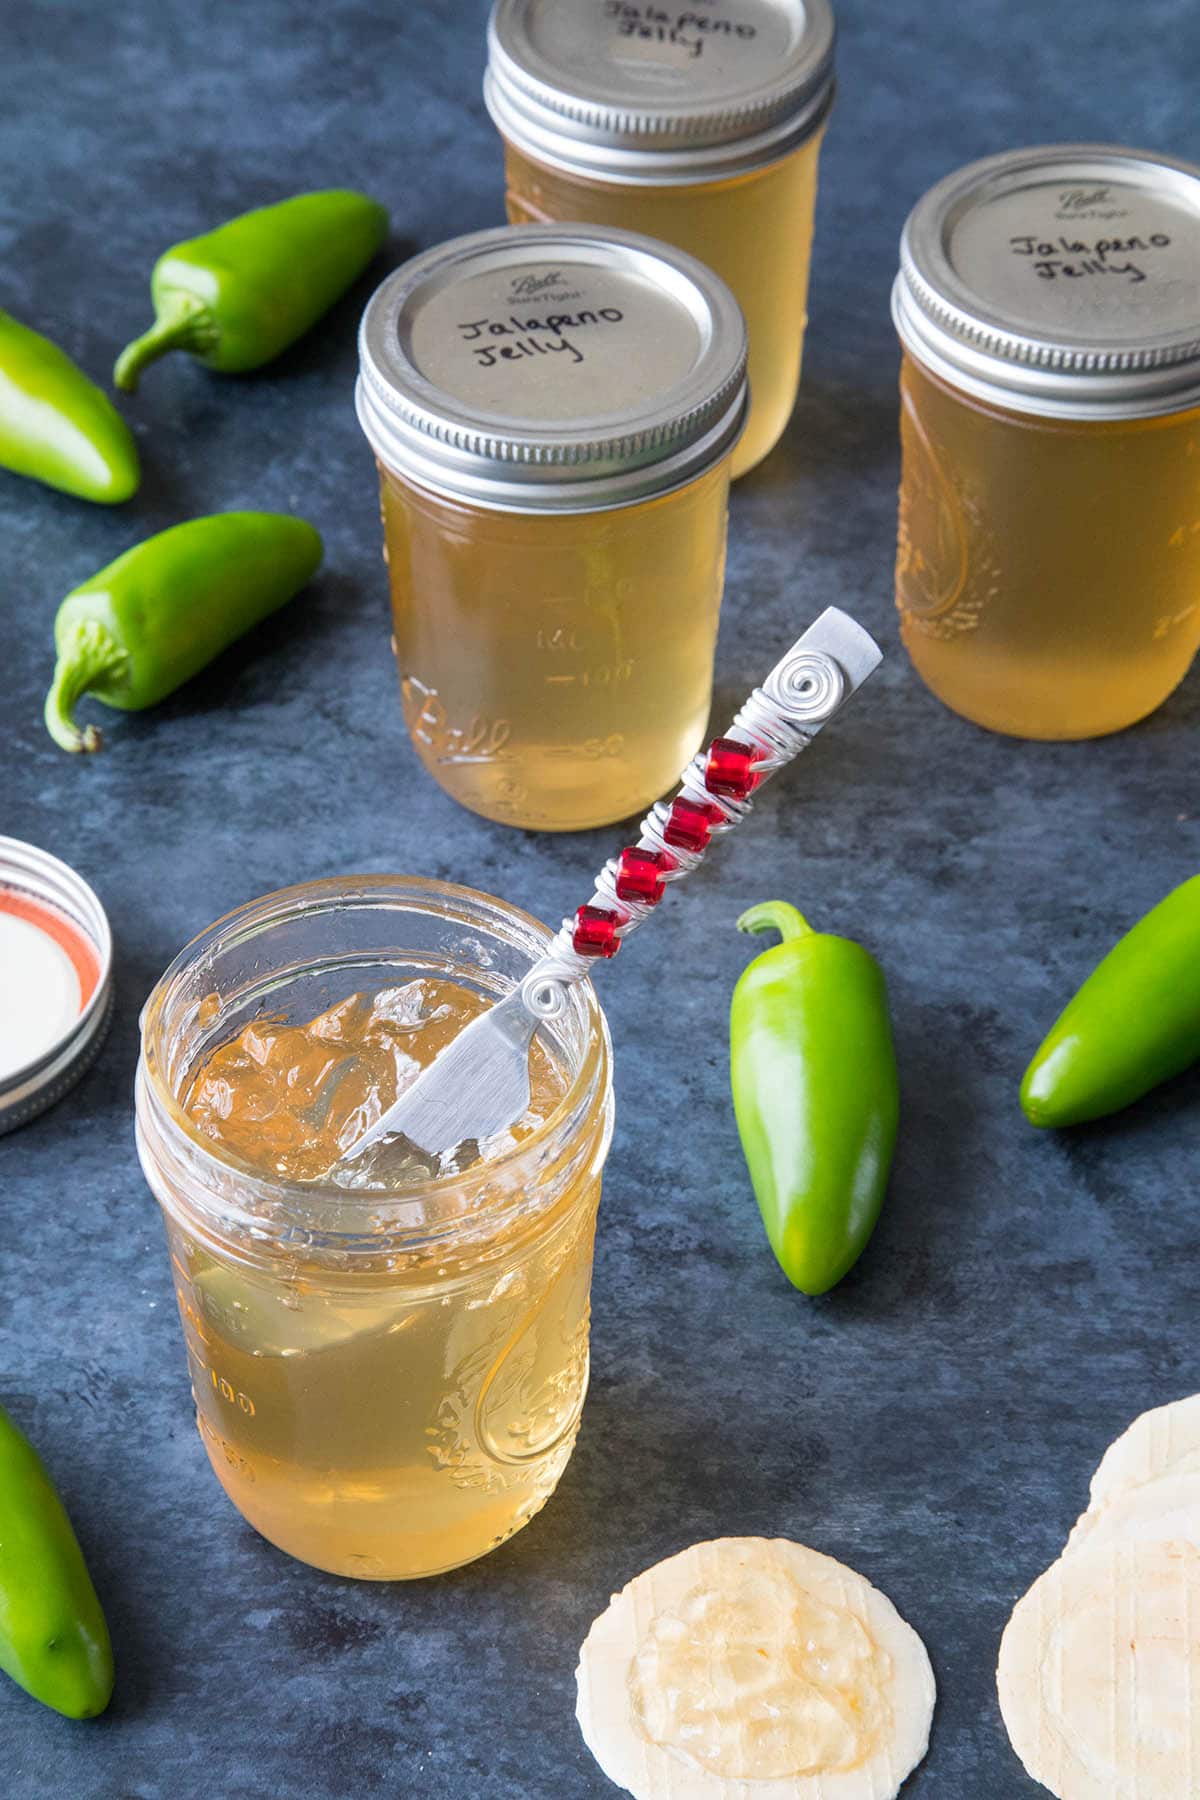 Jalapeno Jelly Recipe - Ready to spread on anything you'd like